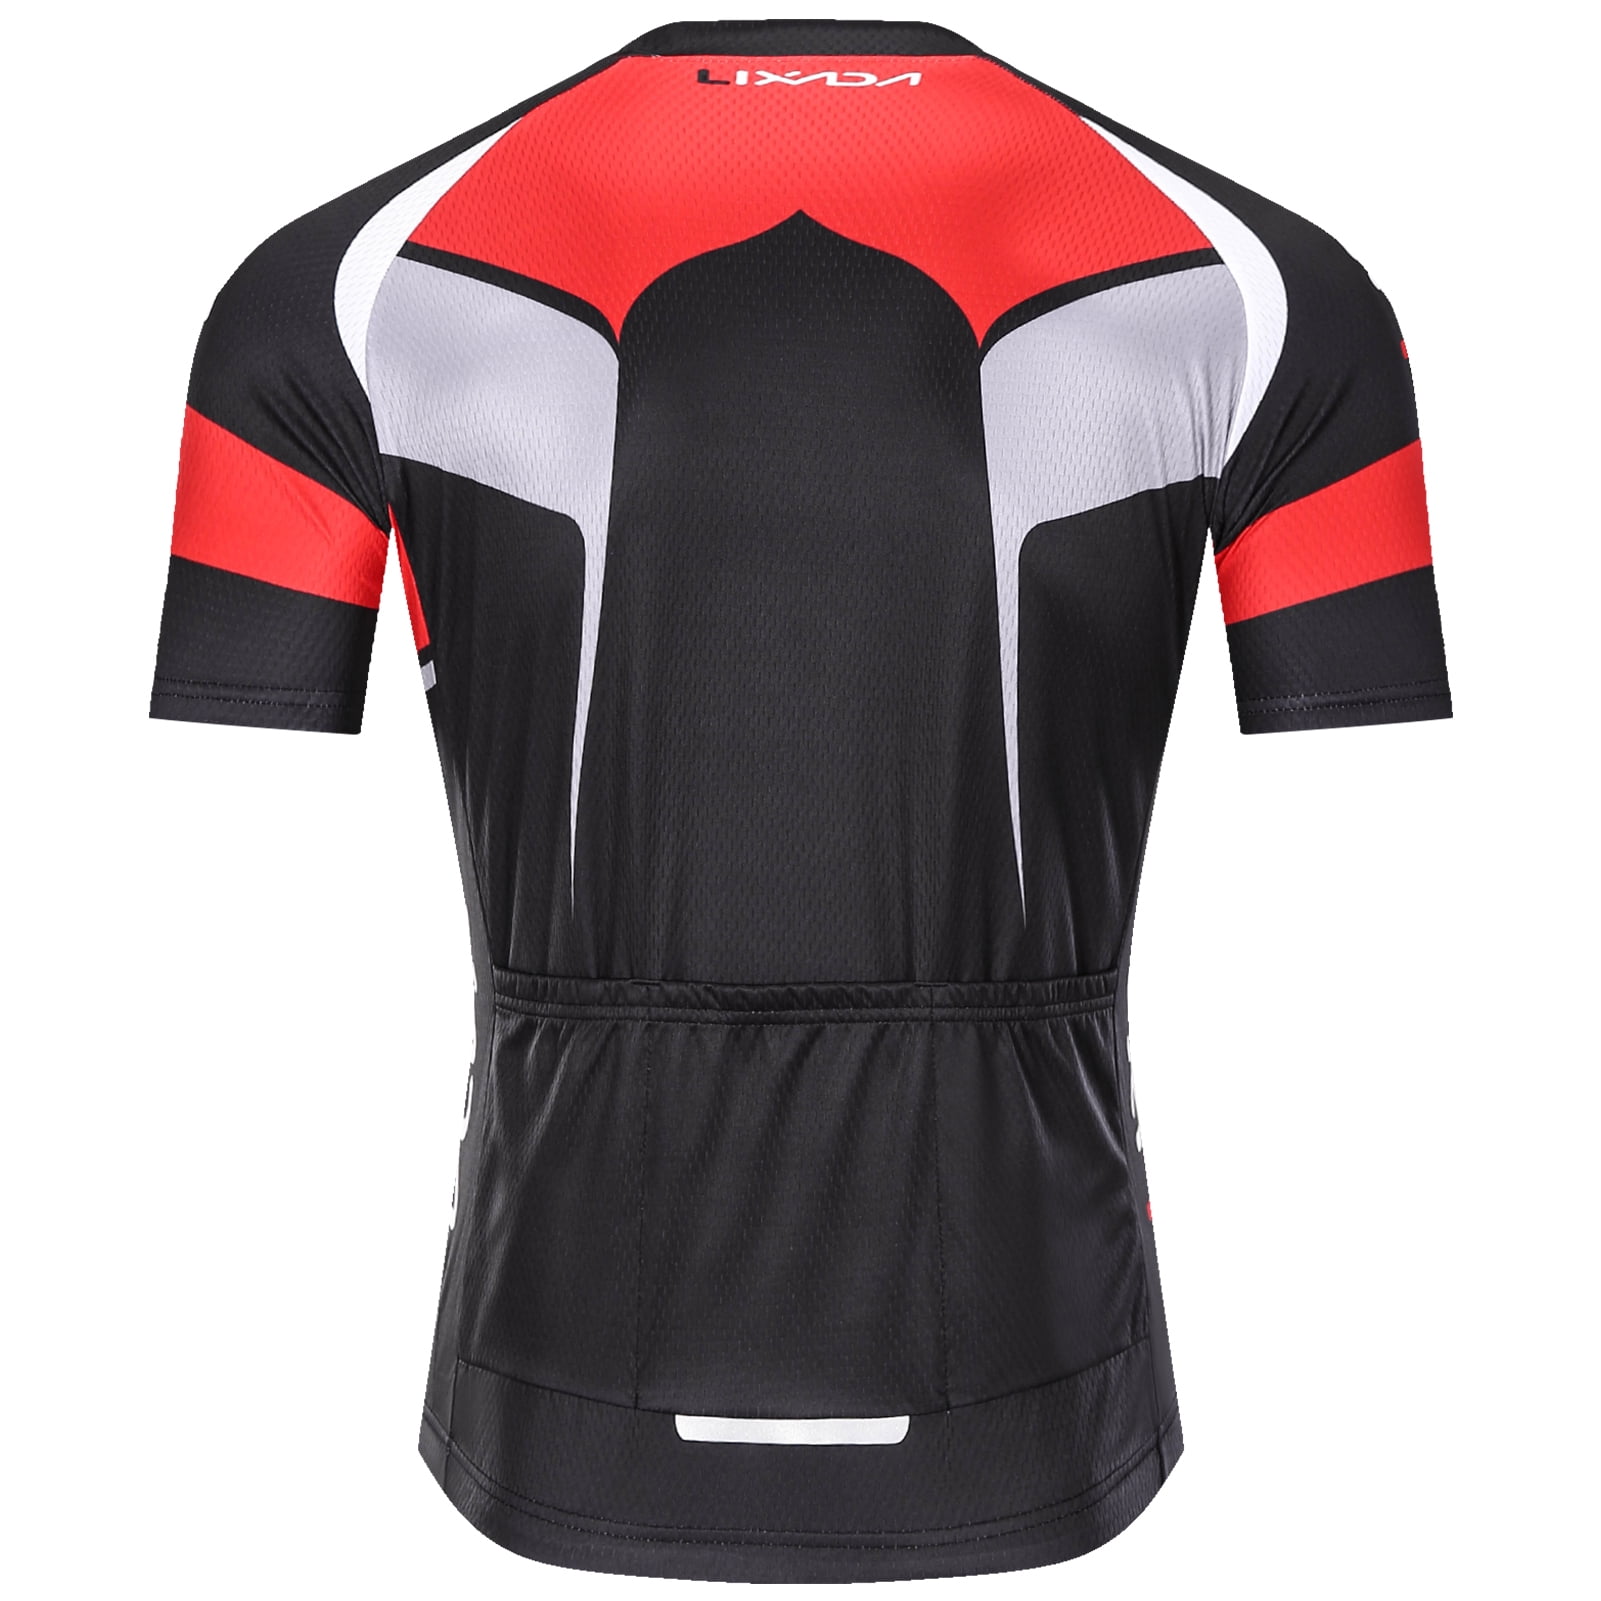 Details about   Mens Cycling Jersey Bib Short Set Cycling Jersey Short Sleeve Cycling Shorts 